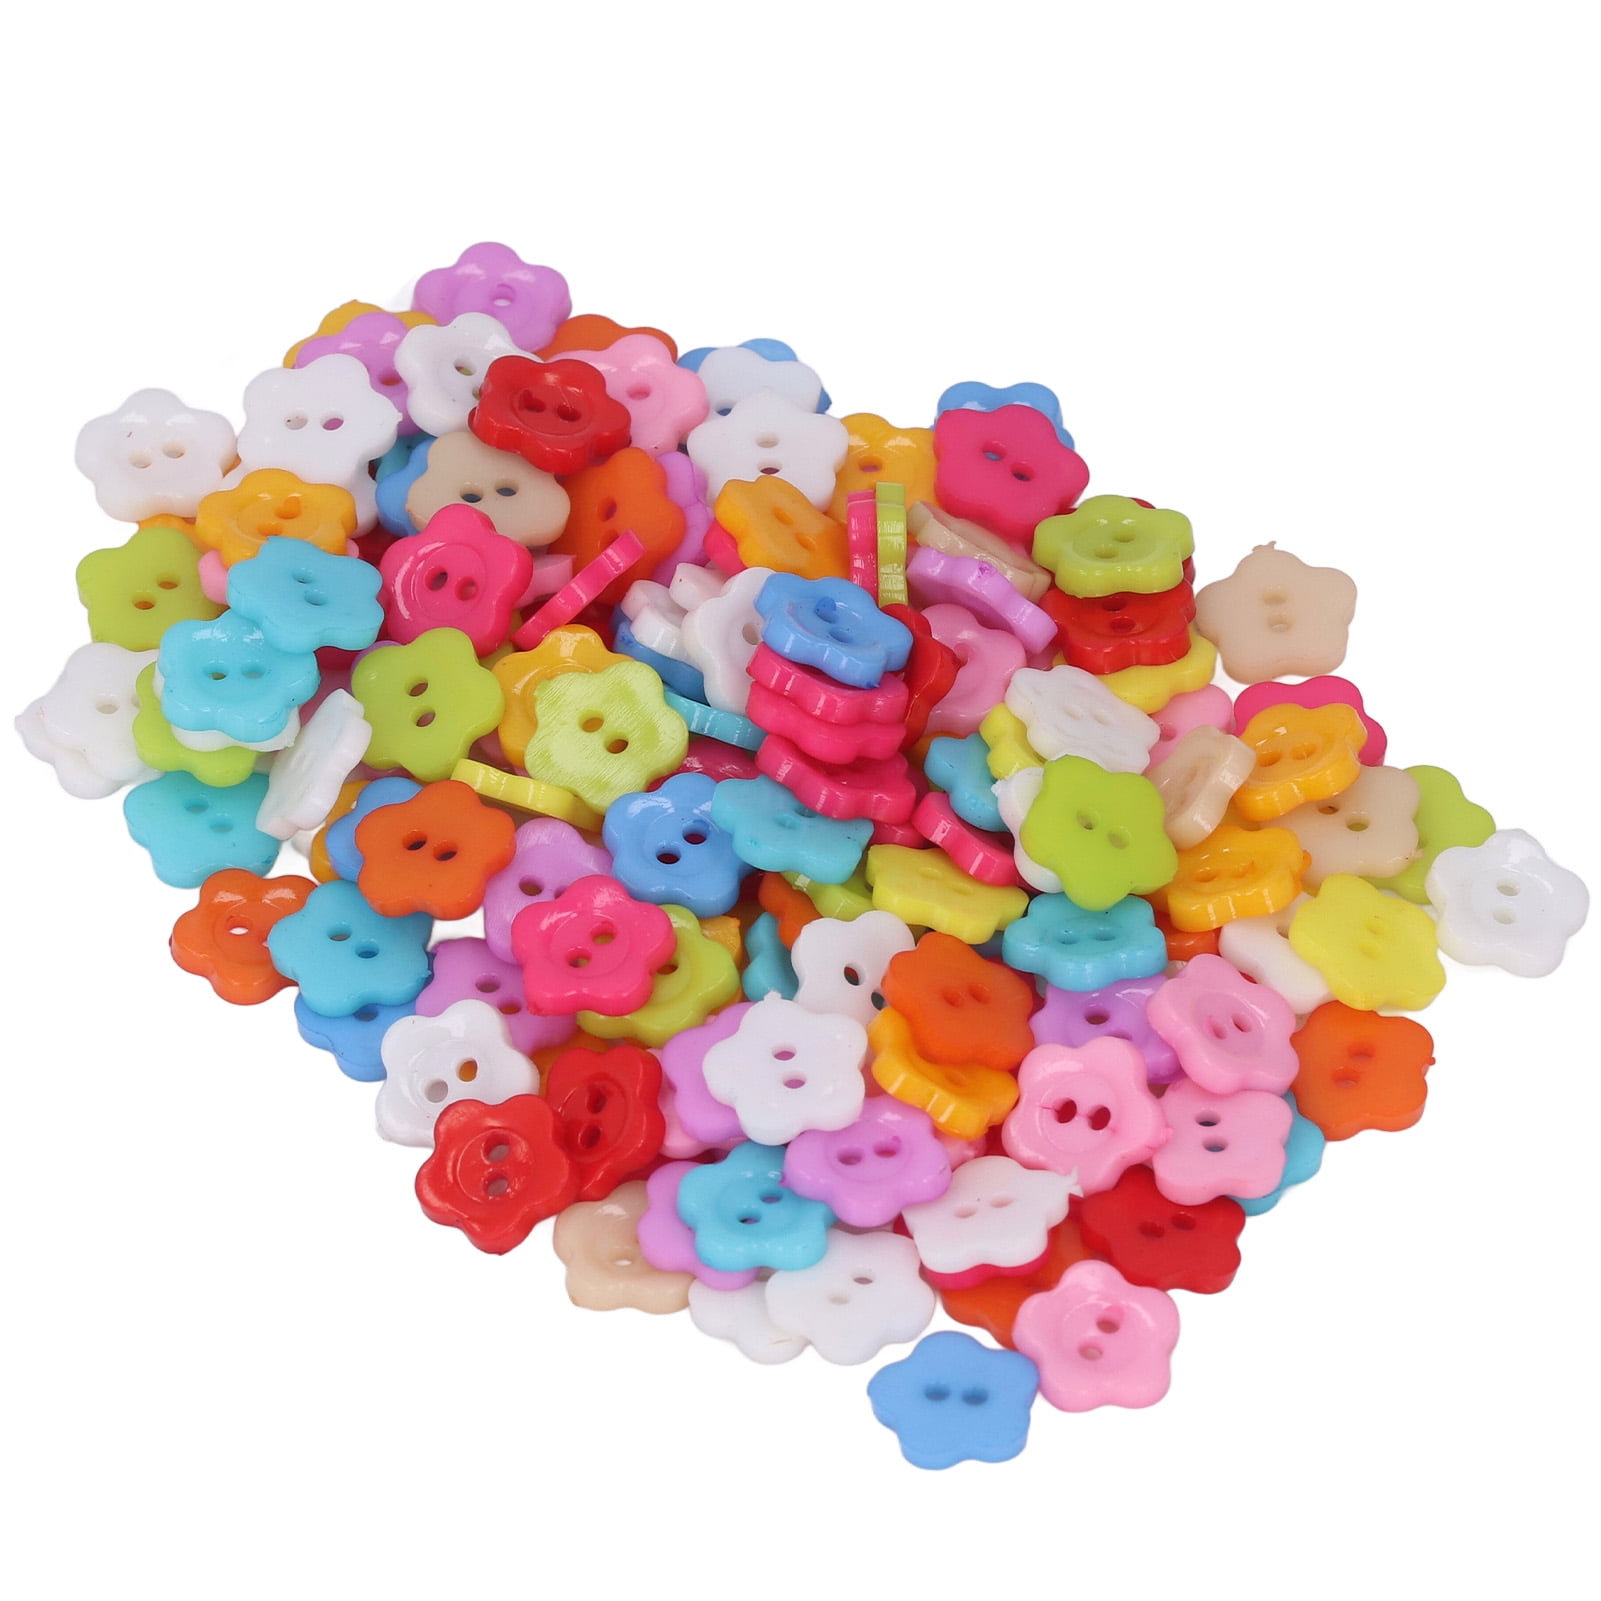 Greensen 200Pcs Star Buttons Colorful Unique Design Cute Small Decorative  Buttons For Sewing Decoration DIY Crafts,Craft Buttons 